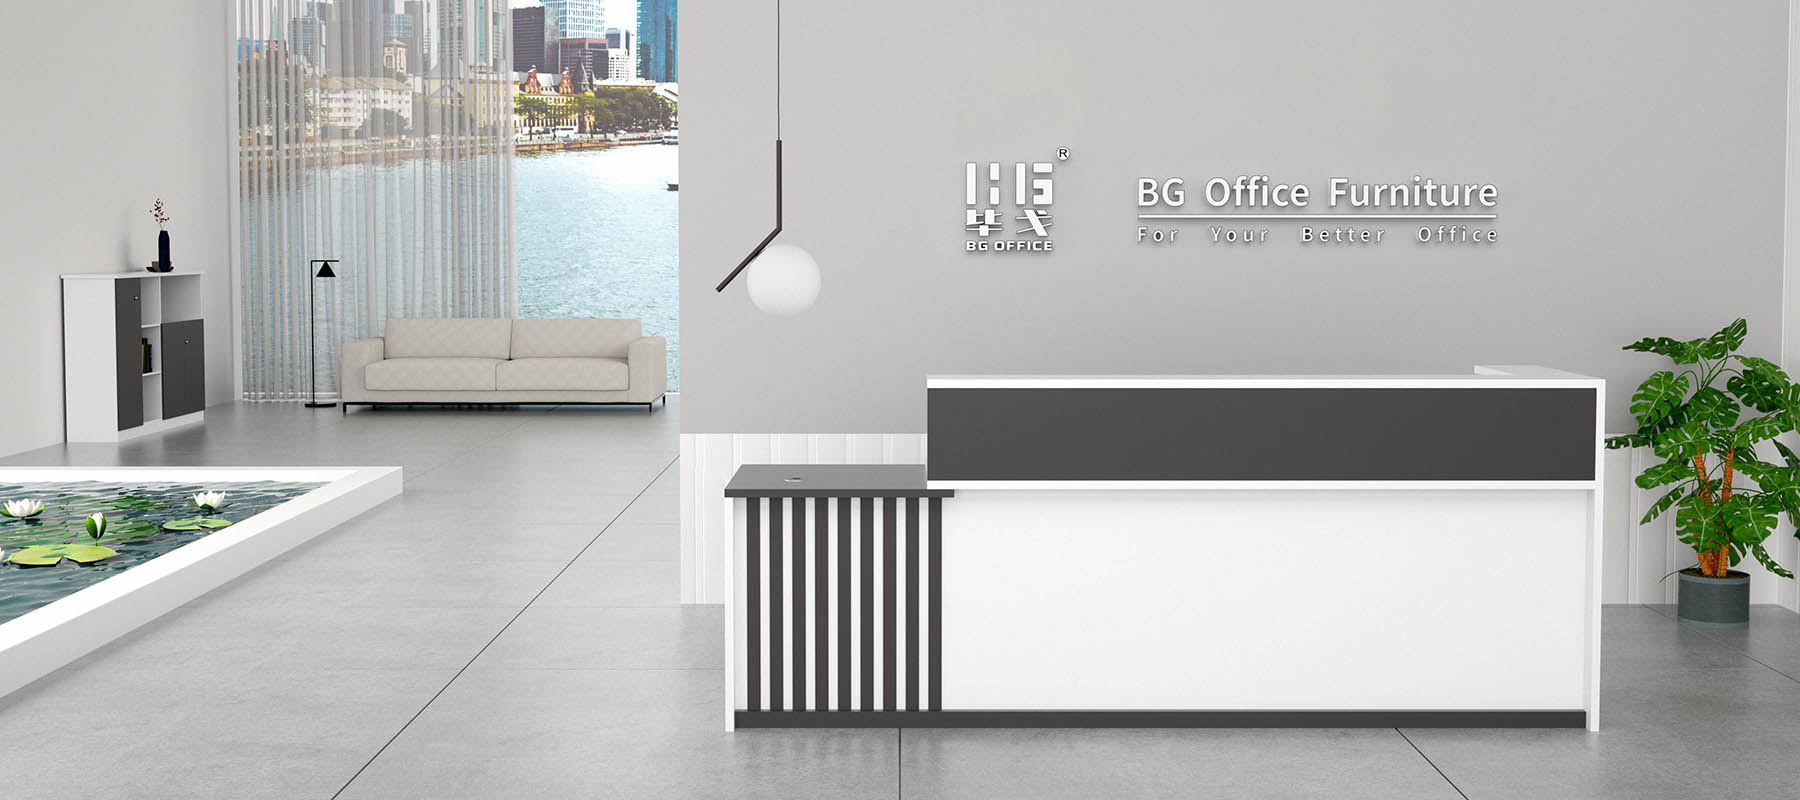 China Office Furniture